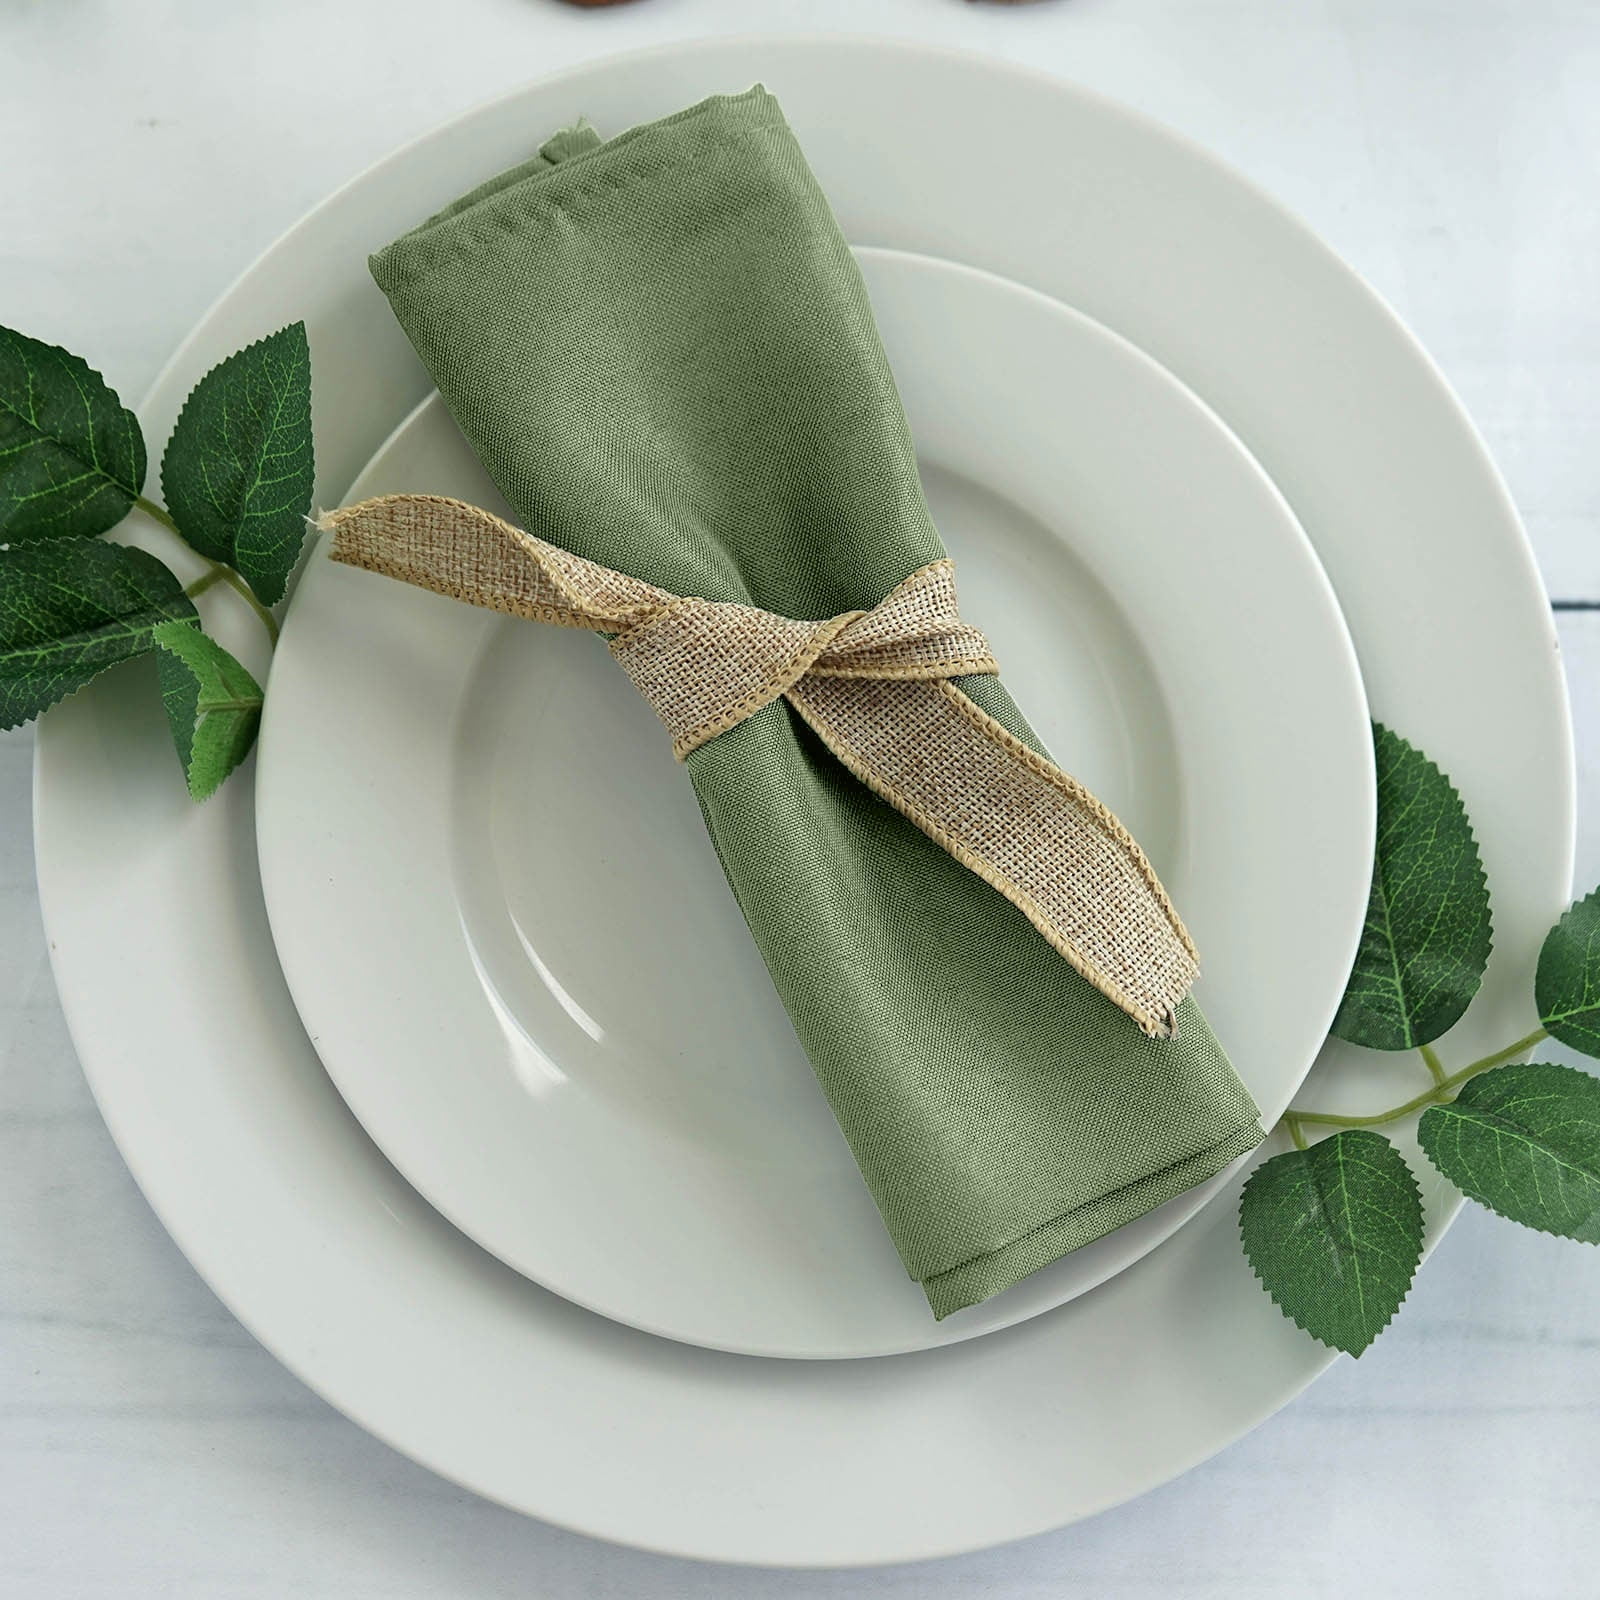 AUUXVA Table Napkin Cloth Set of 4 Green Tropical Palm Leaves Cloth Napkins  20x20in Washable Wrinkle Free Dinner Napkin for Wedding Parties Restaurant